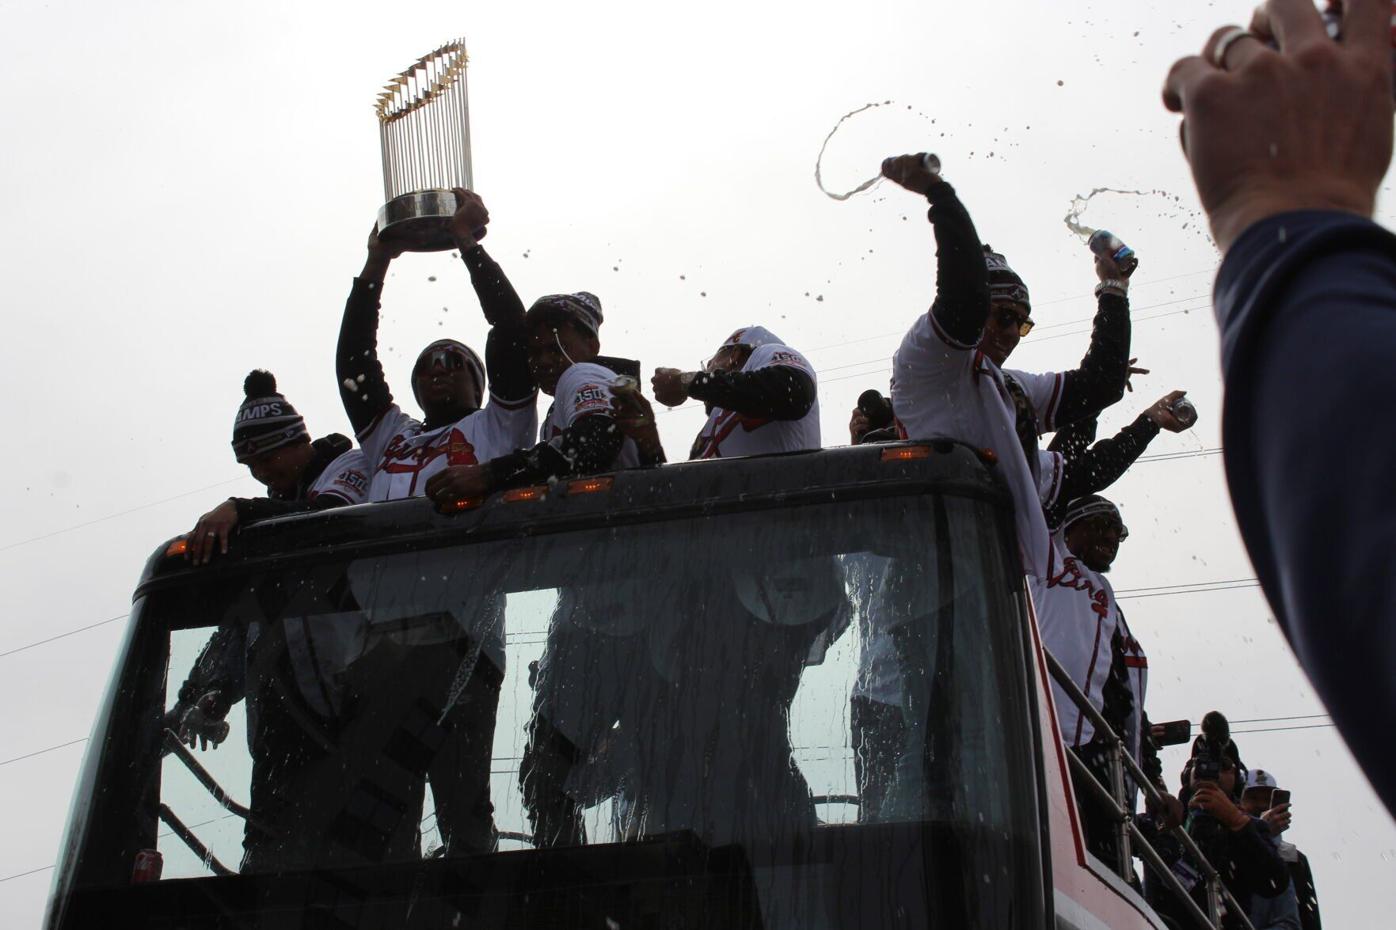 Braves Champions Trophy Tour makes stop in Southaven